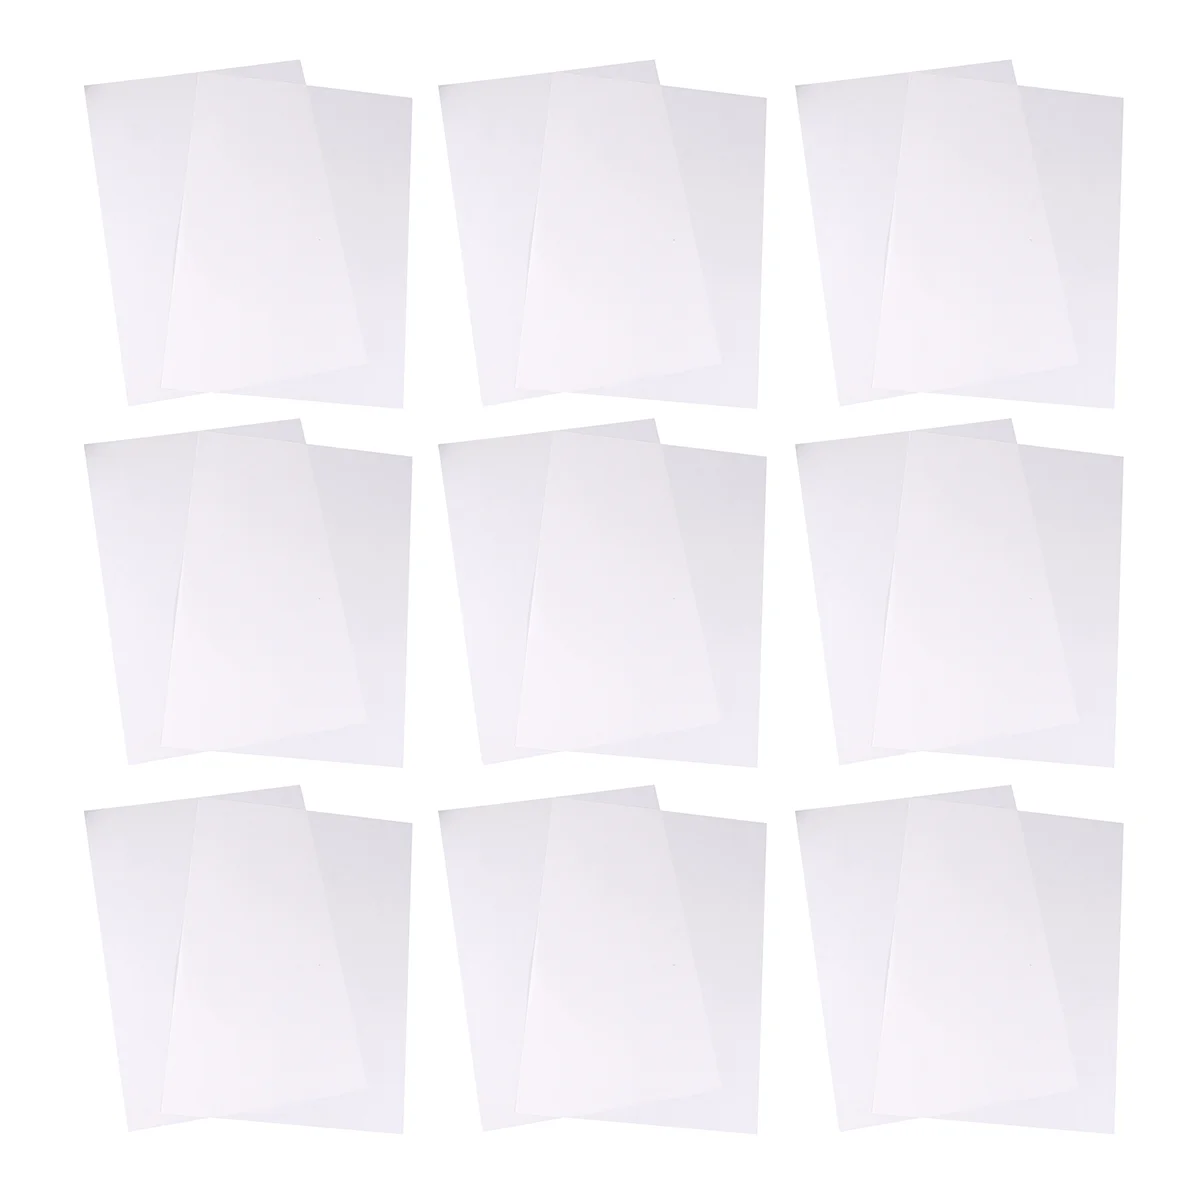 100 Sheets Release Paper Non- Double- sided 5D Painting Replacement Cover Painting Accessories for Painting Crafts ( White ) 2pcs clips for led diamond painting light box pad copy board diy 5d painting accessories cross stitch tools crafting accessories